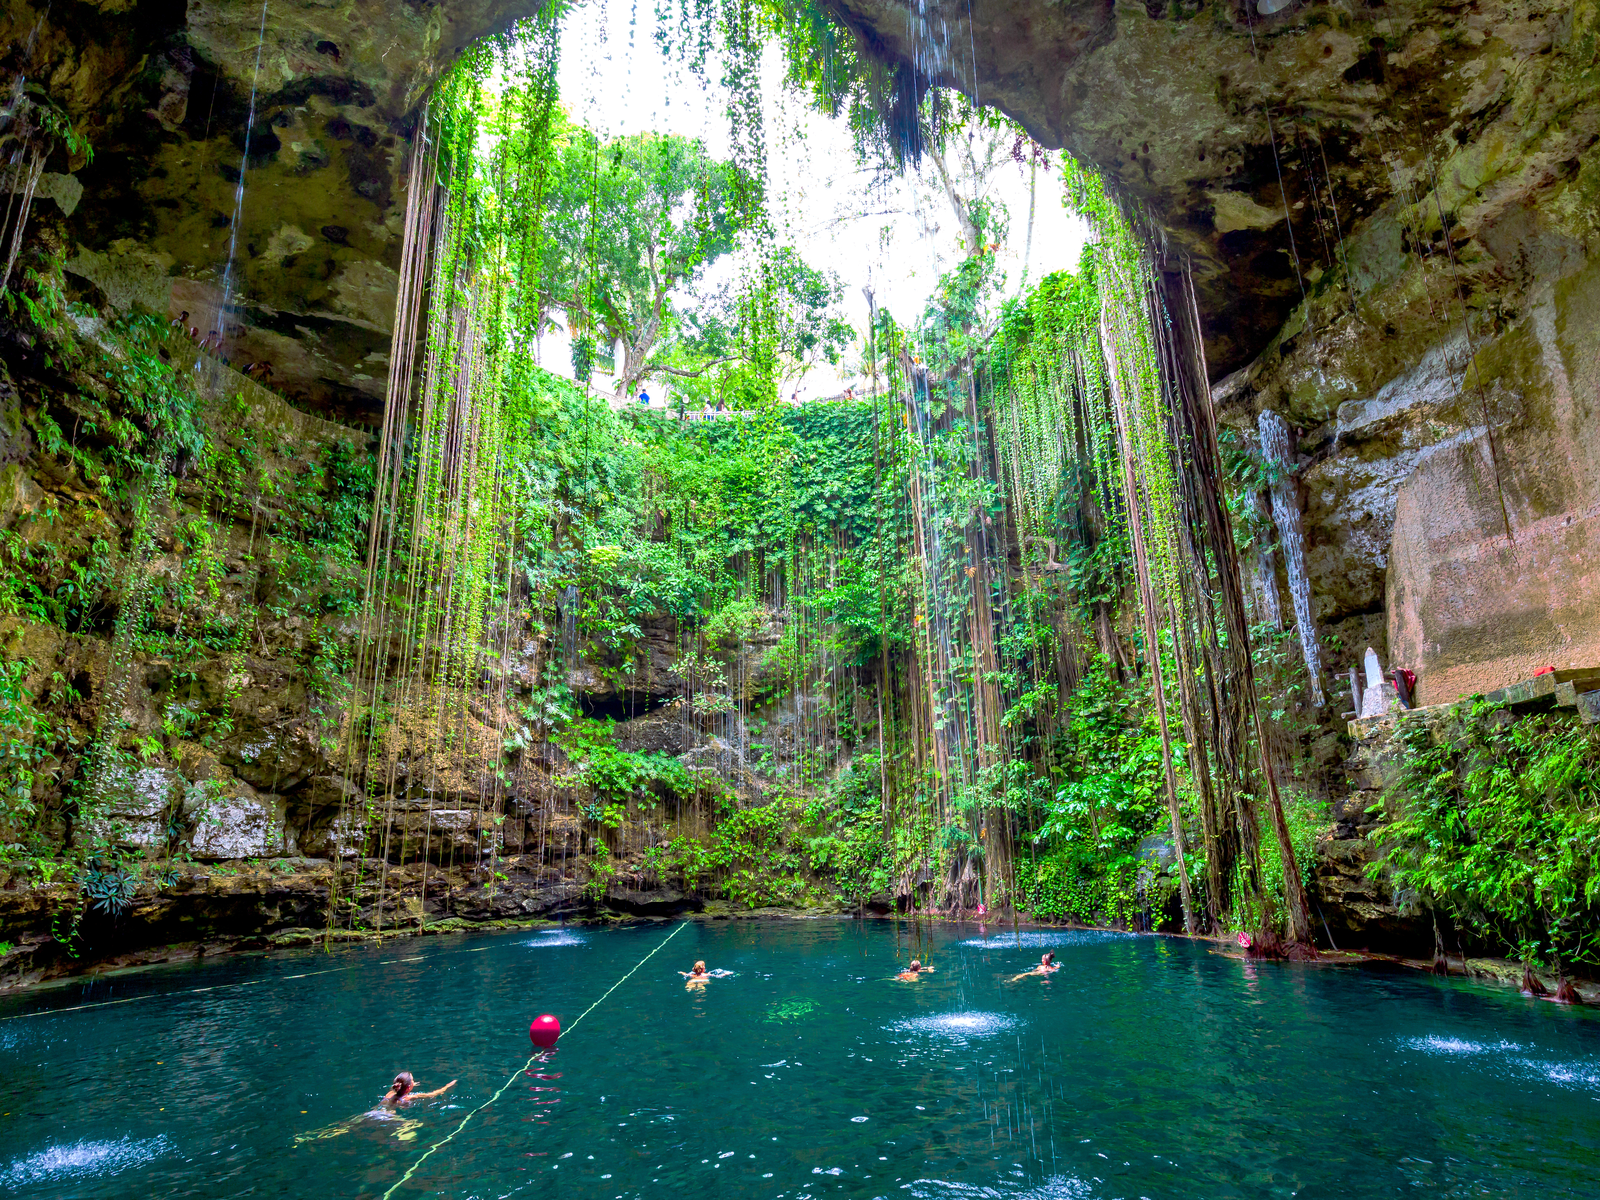 Tourist enjoying a swim at a gigantic well with dangling vines at its crater in Cenote Ik Kil as one of the best things to do in Cancun